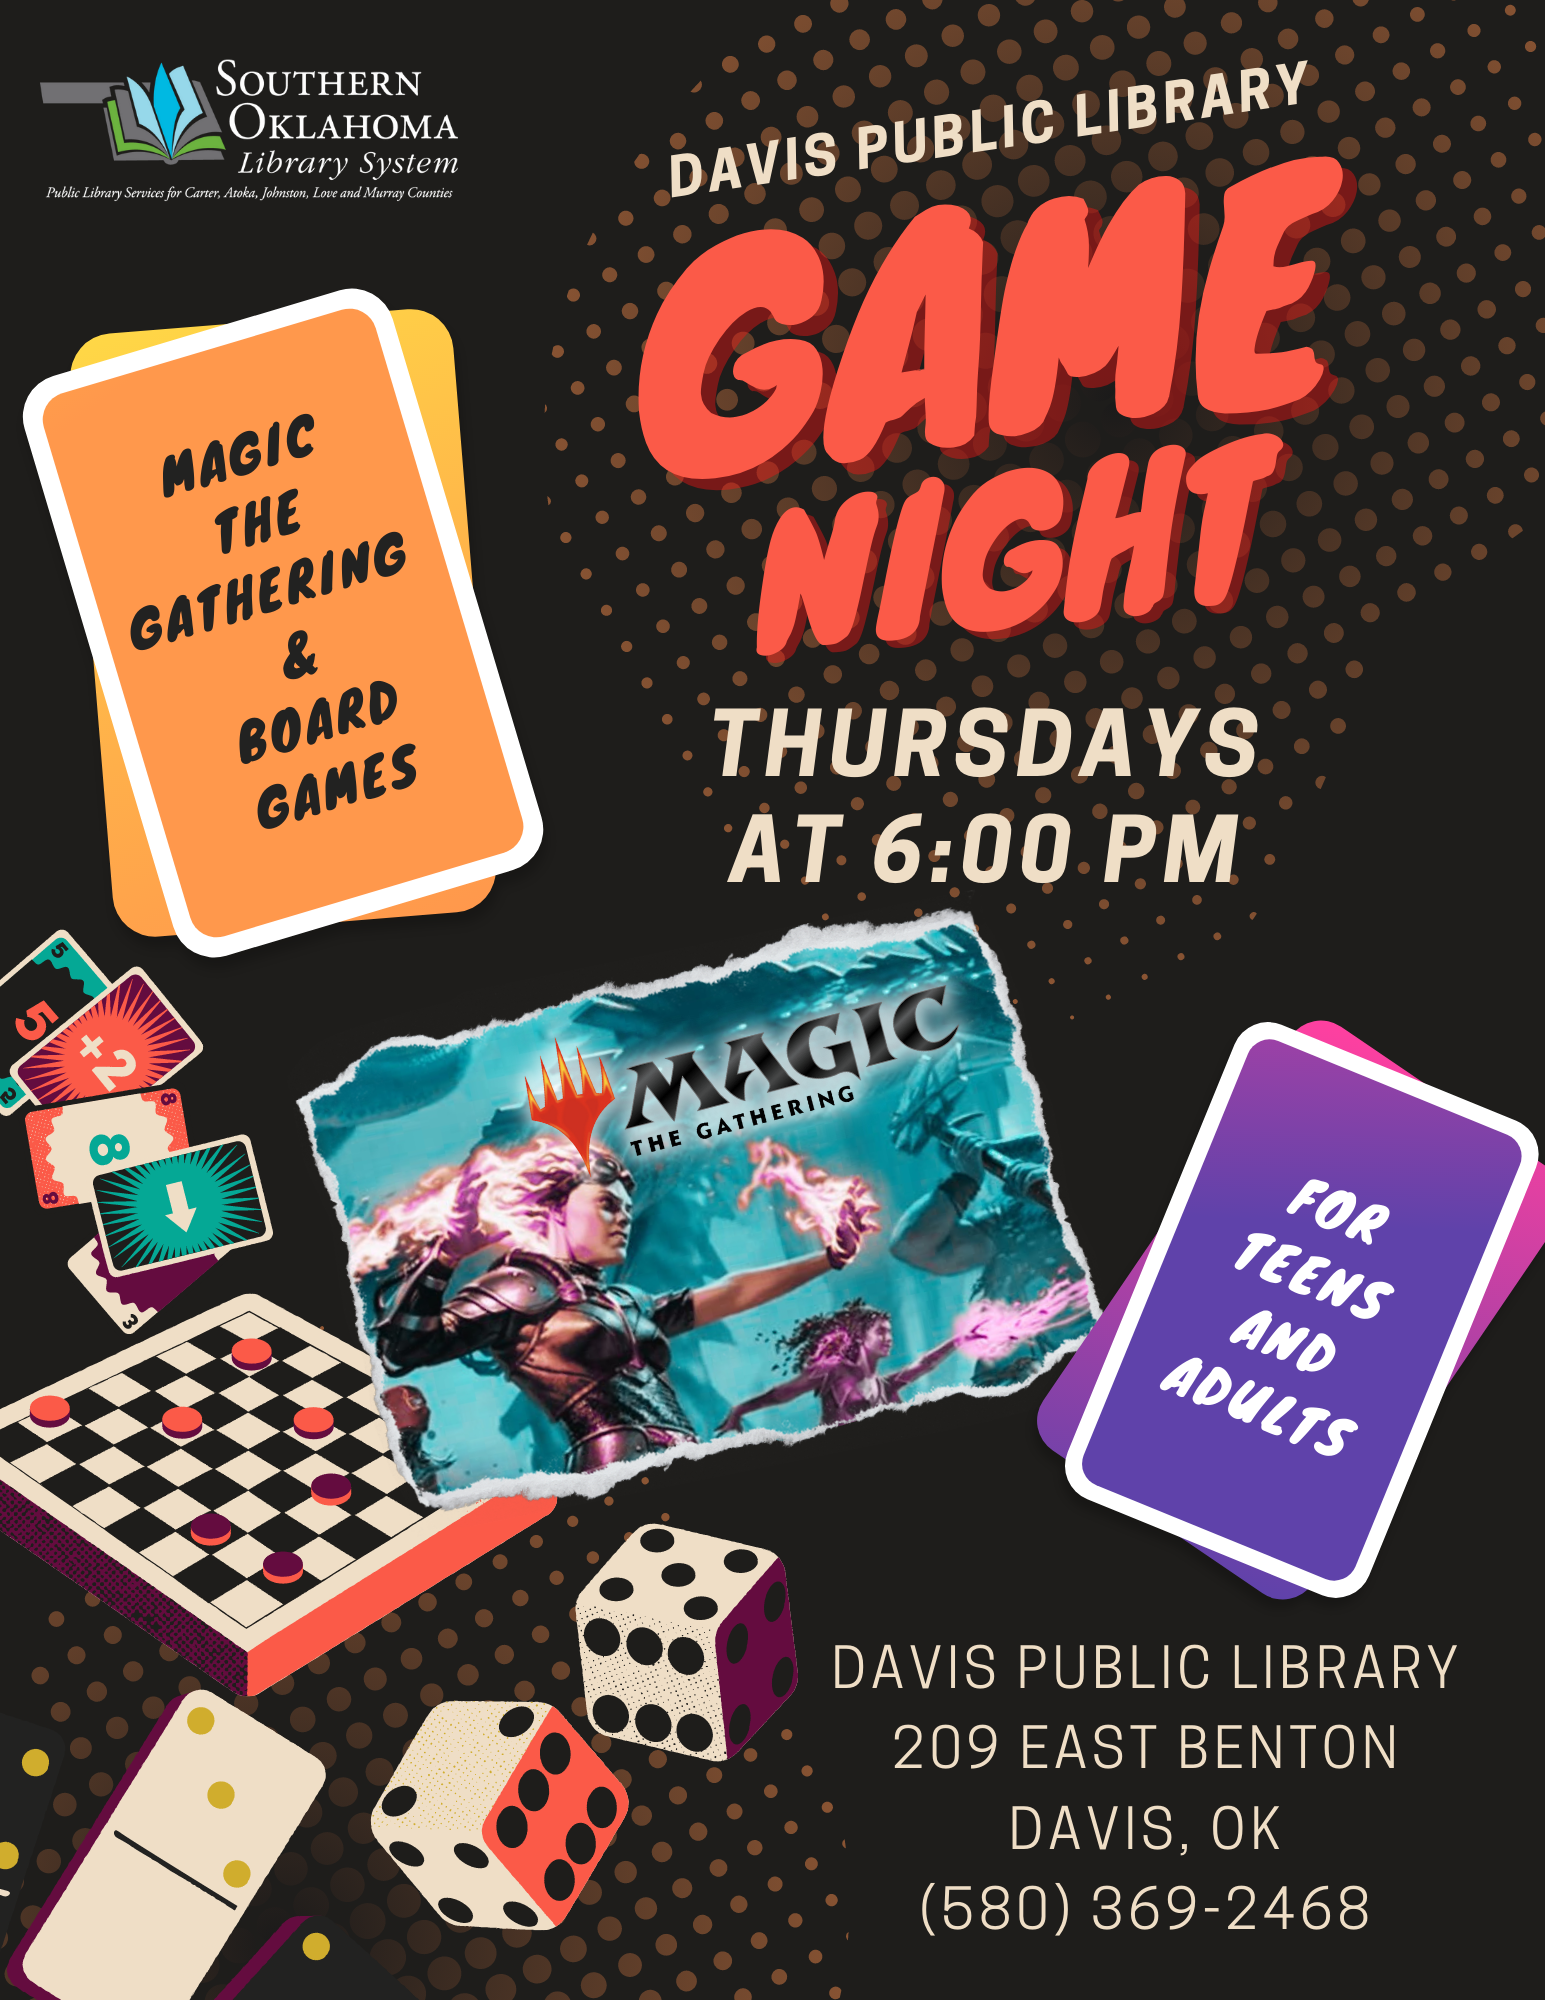 Black background with vintage style board game art in background along with an image from magic the gathering card game. Davis Public Library's game night every Thursday at 6:00 PM.